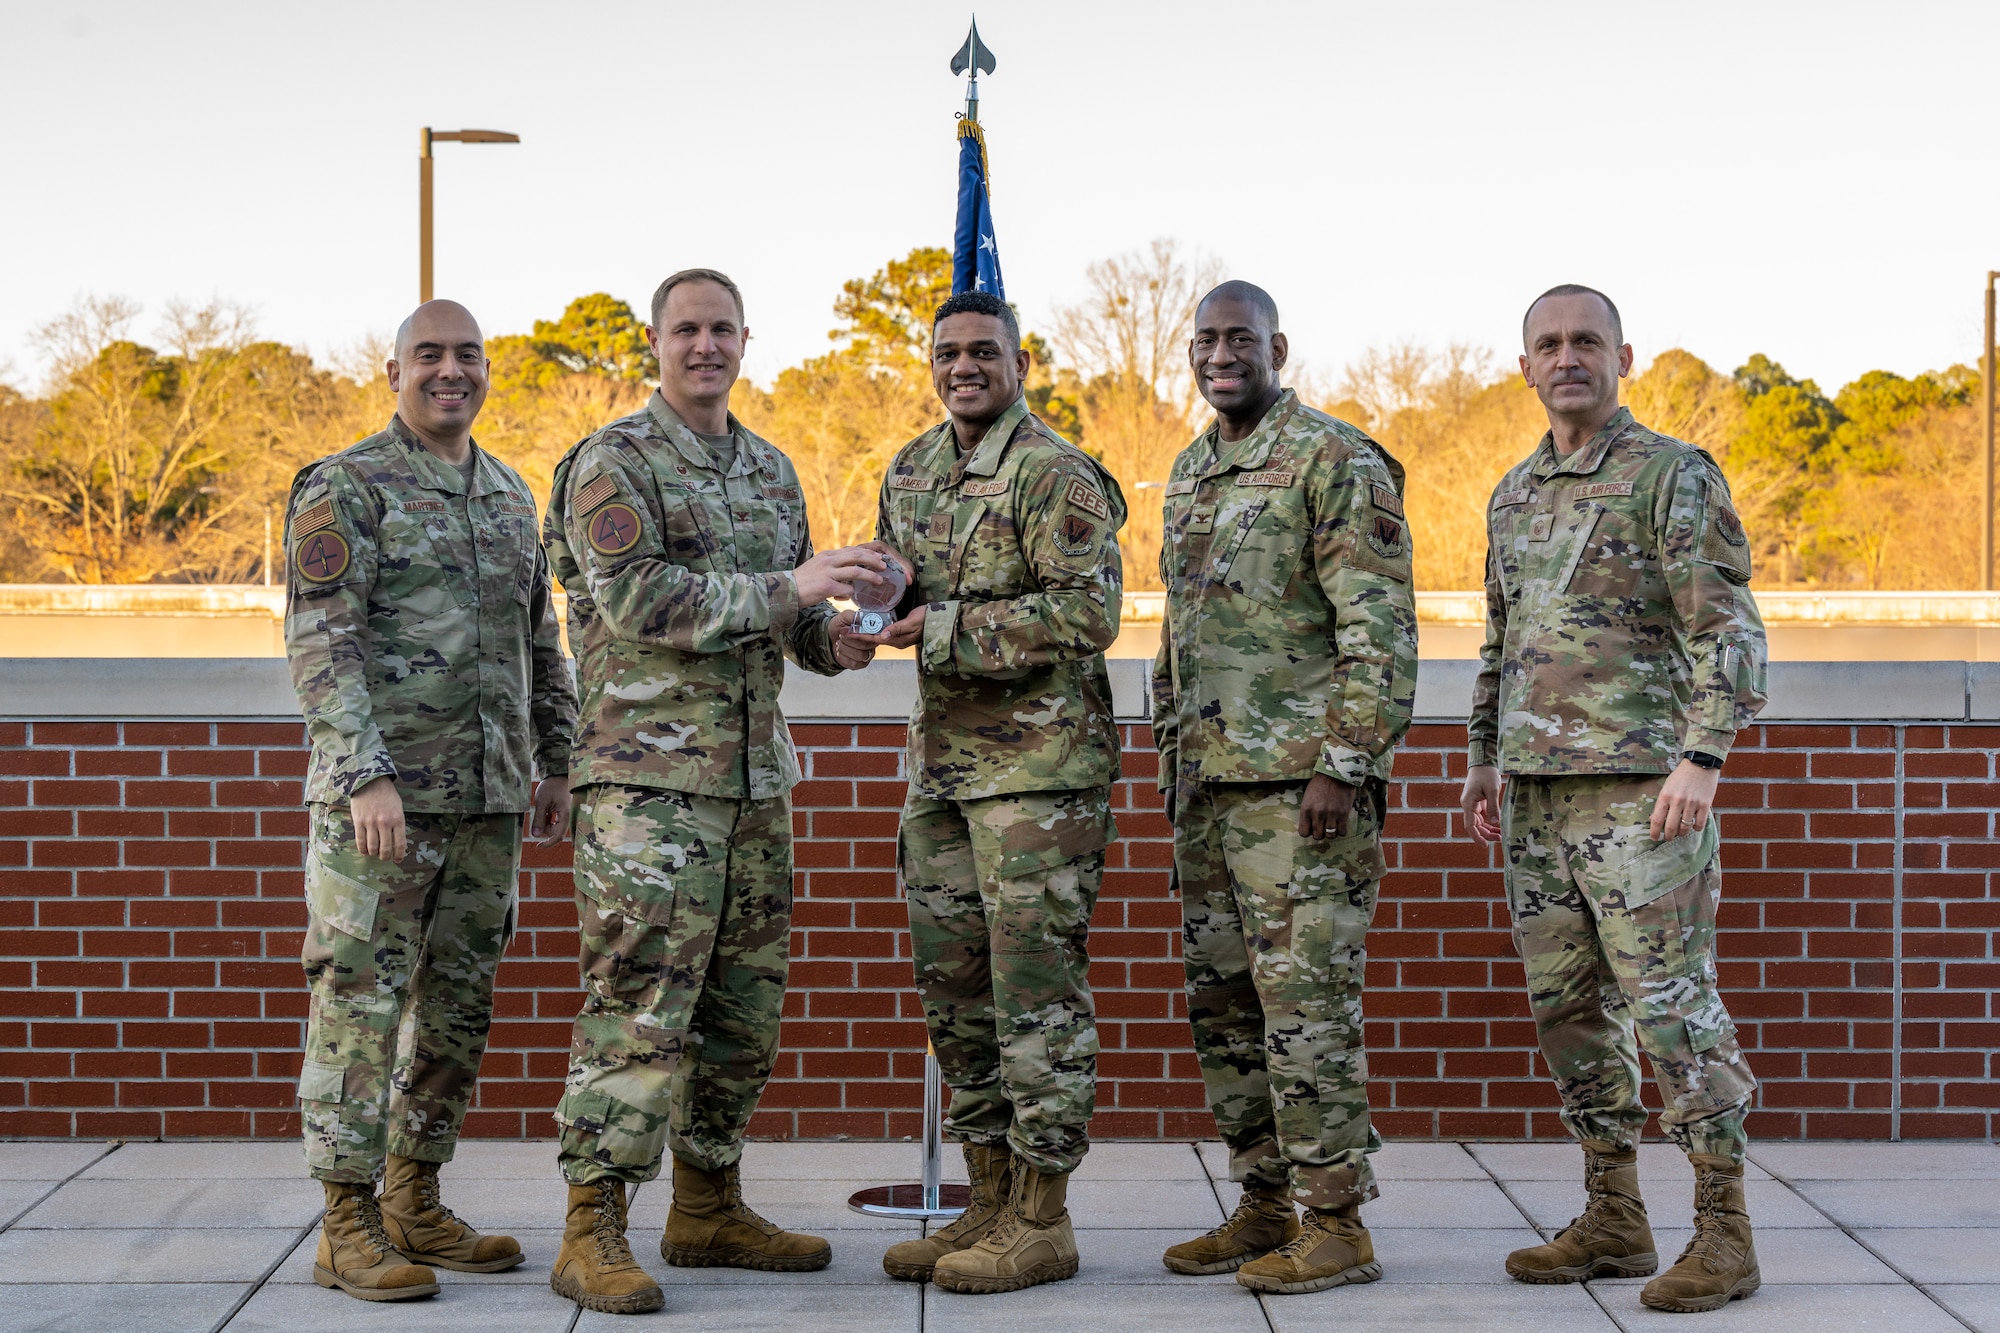 Cameron was awarded the Air Force Medical Service Award for Air Combat Command’s 2022 Bioenvironmental Engineering Non-Commissioned Officer of the Year.